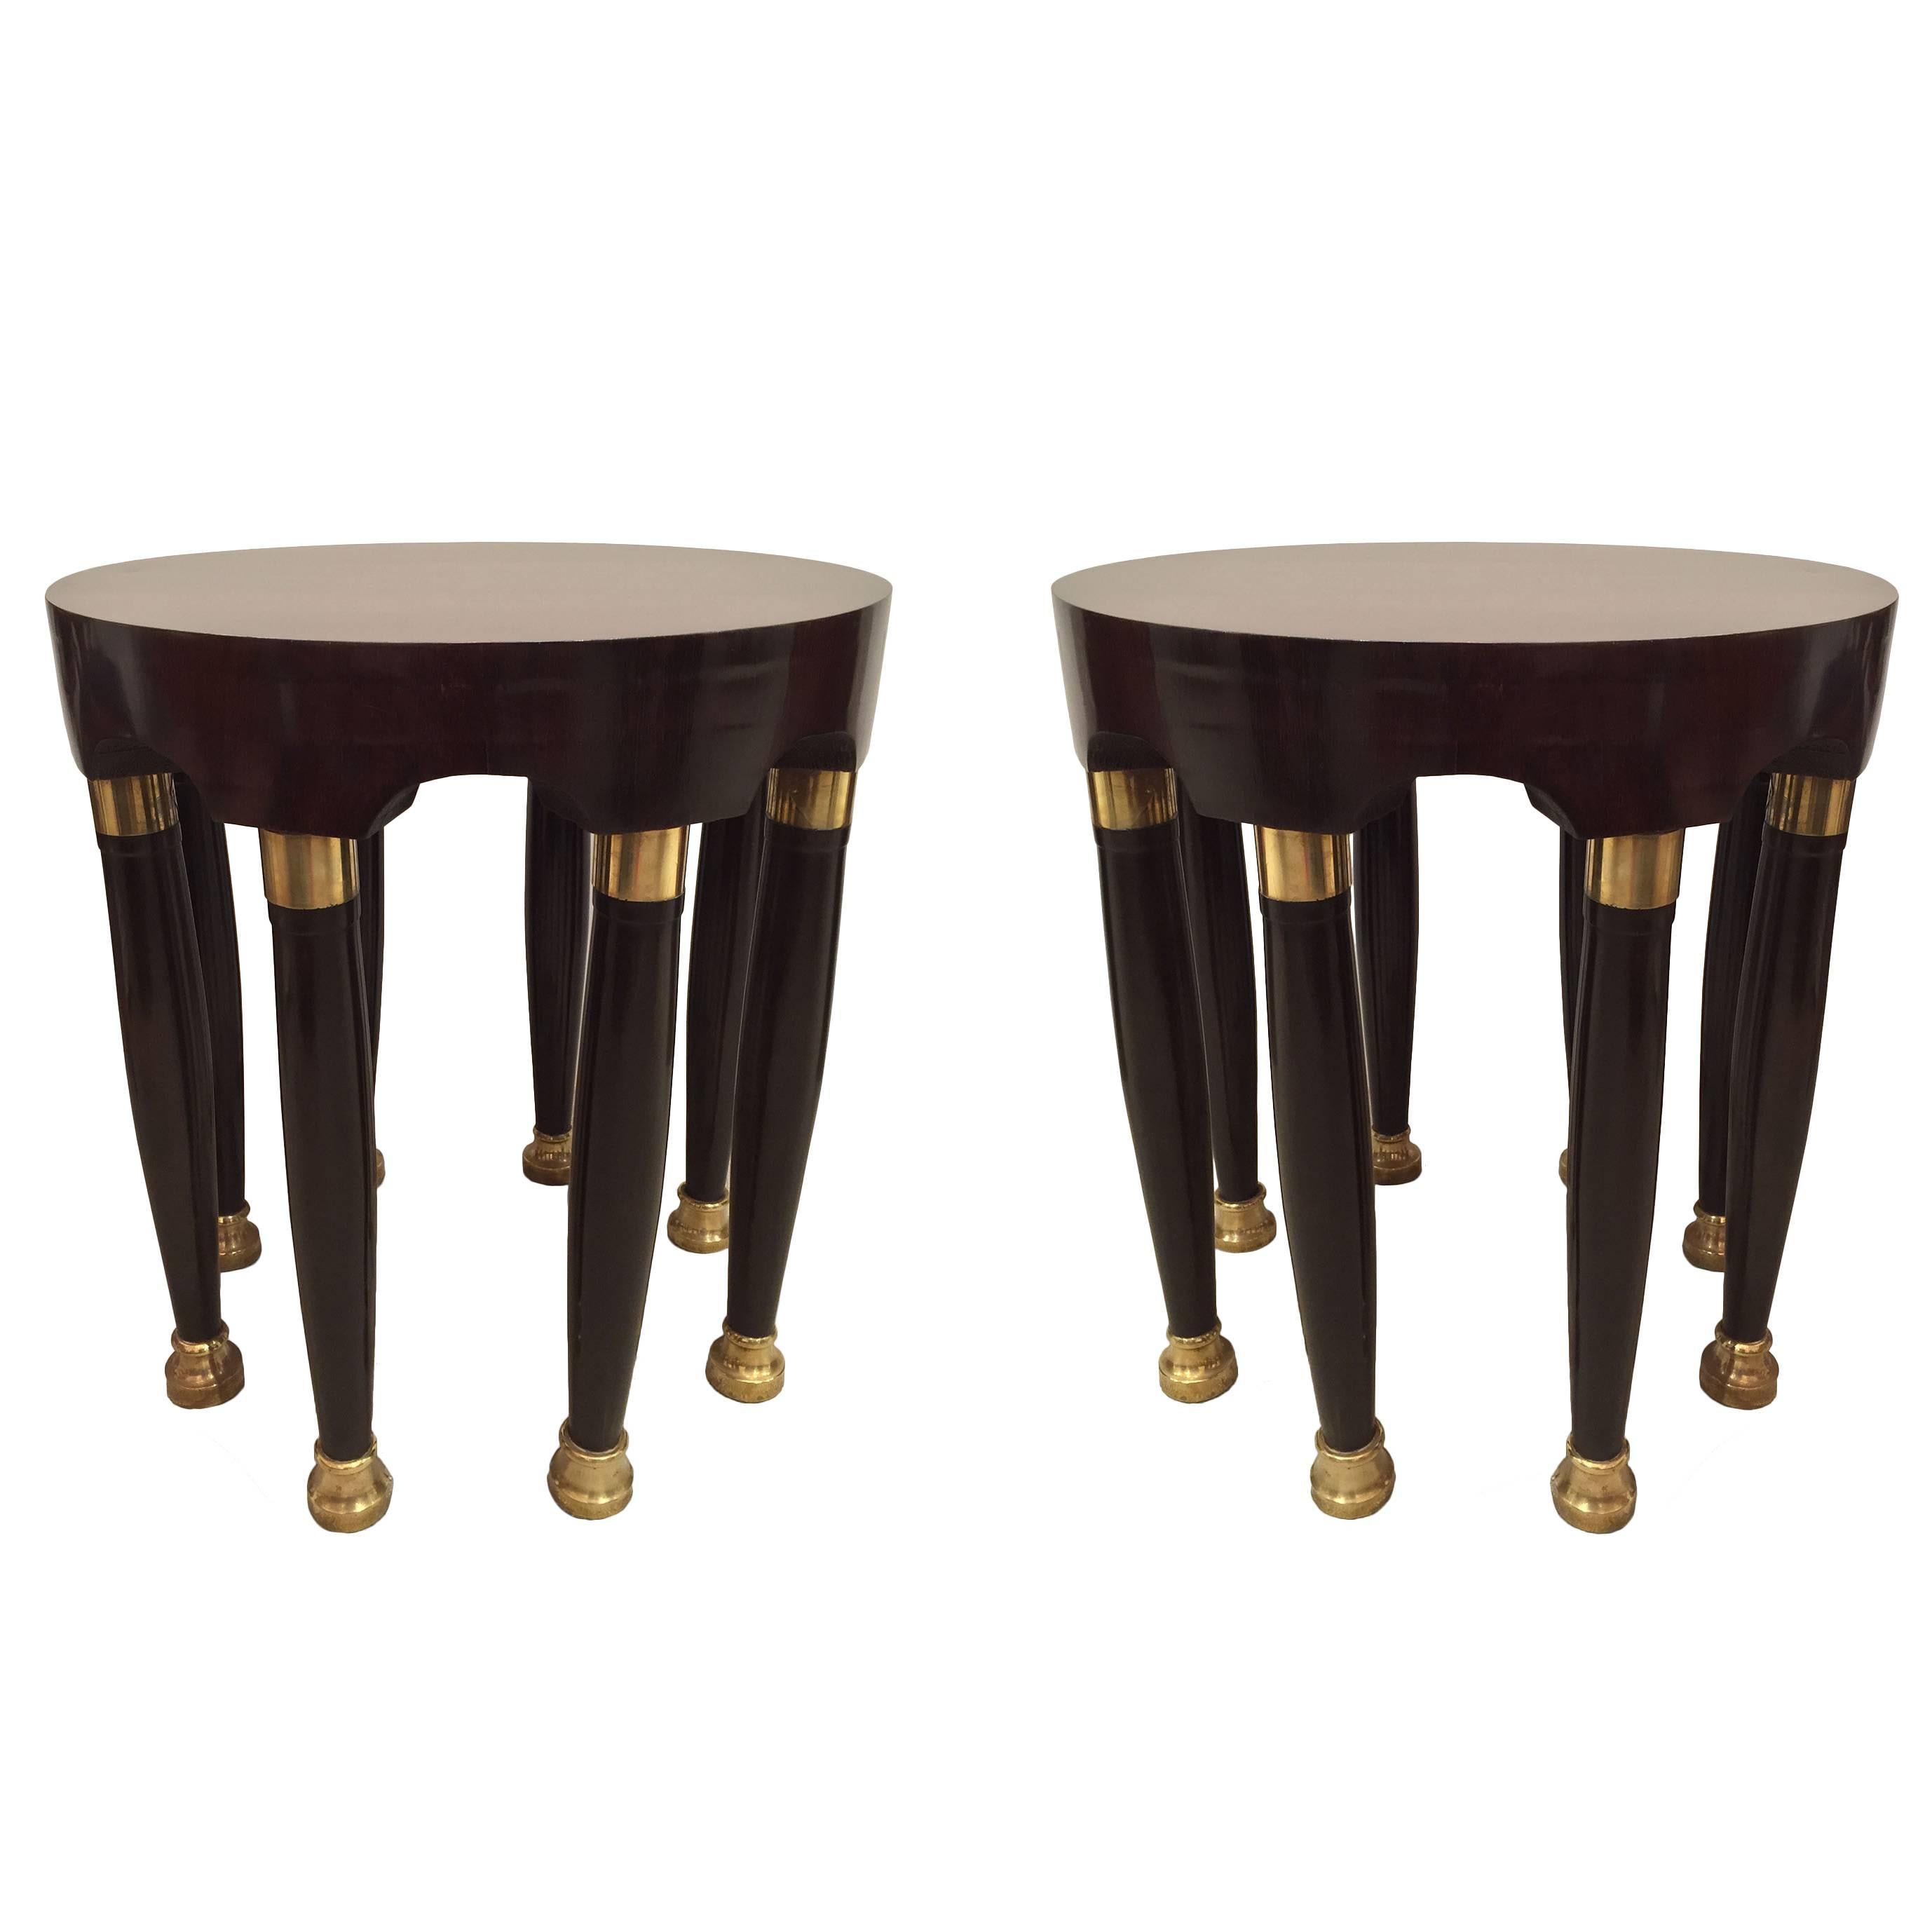 Pair of 1940s Continental Art Deco Round Gilt Trimmed Mahogany End Tables